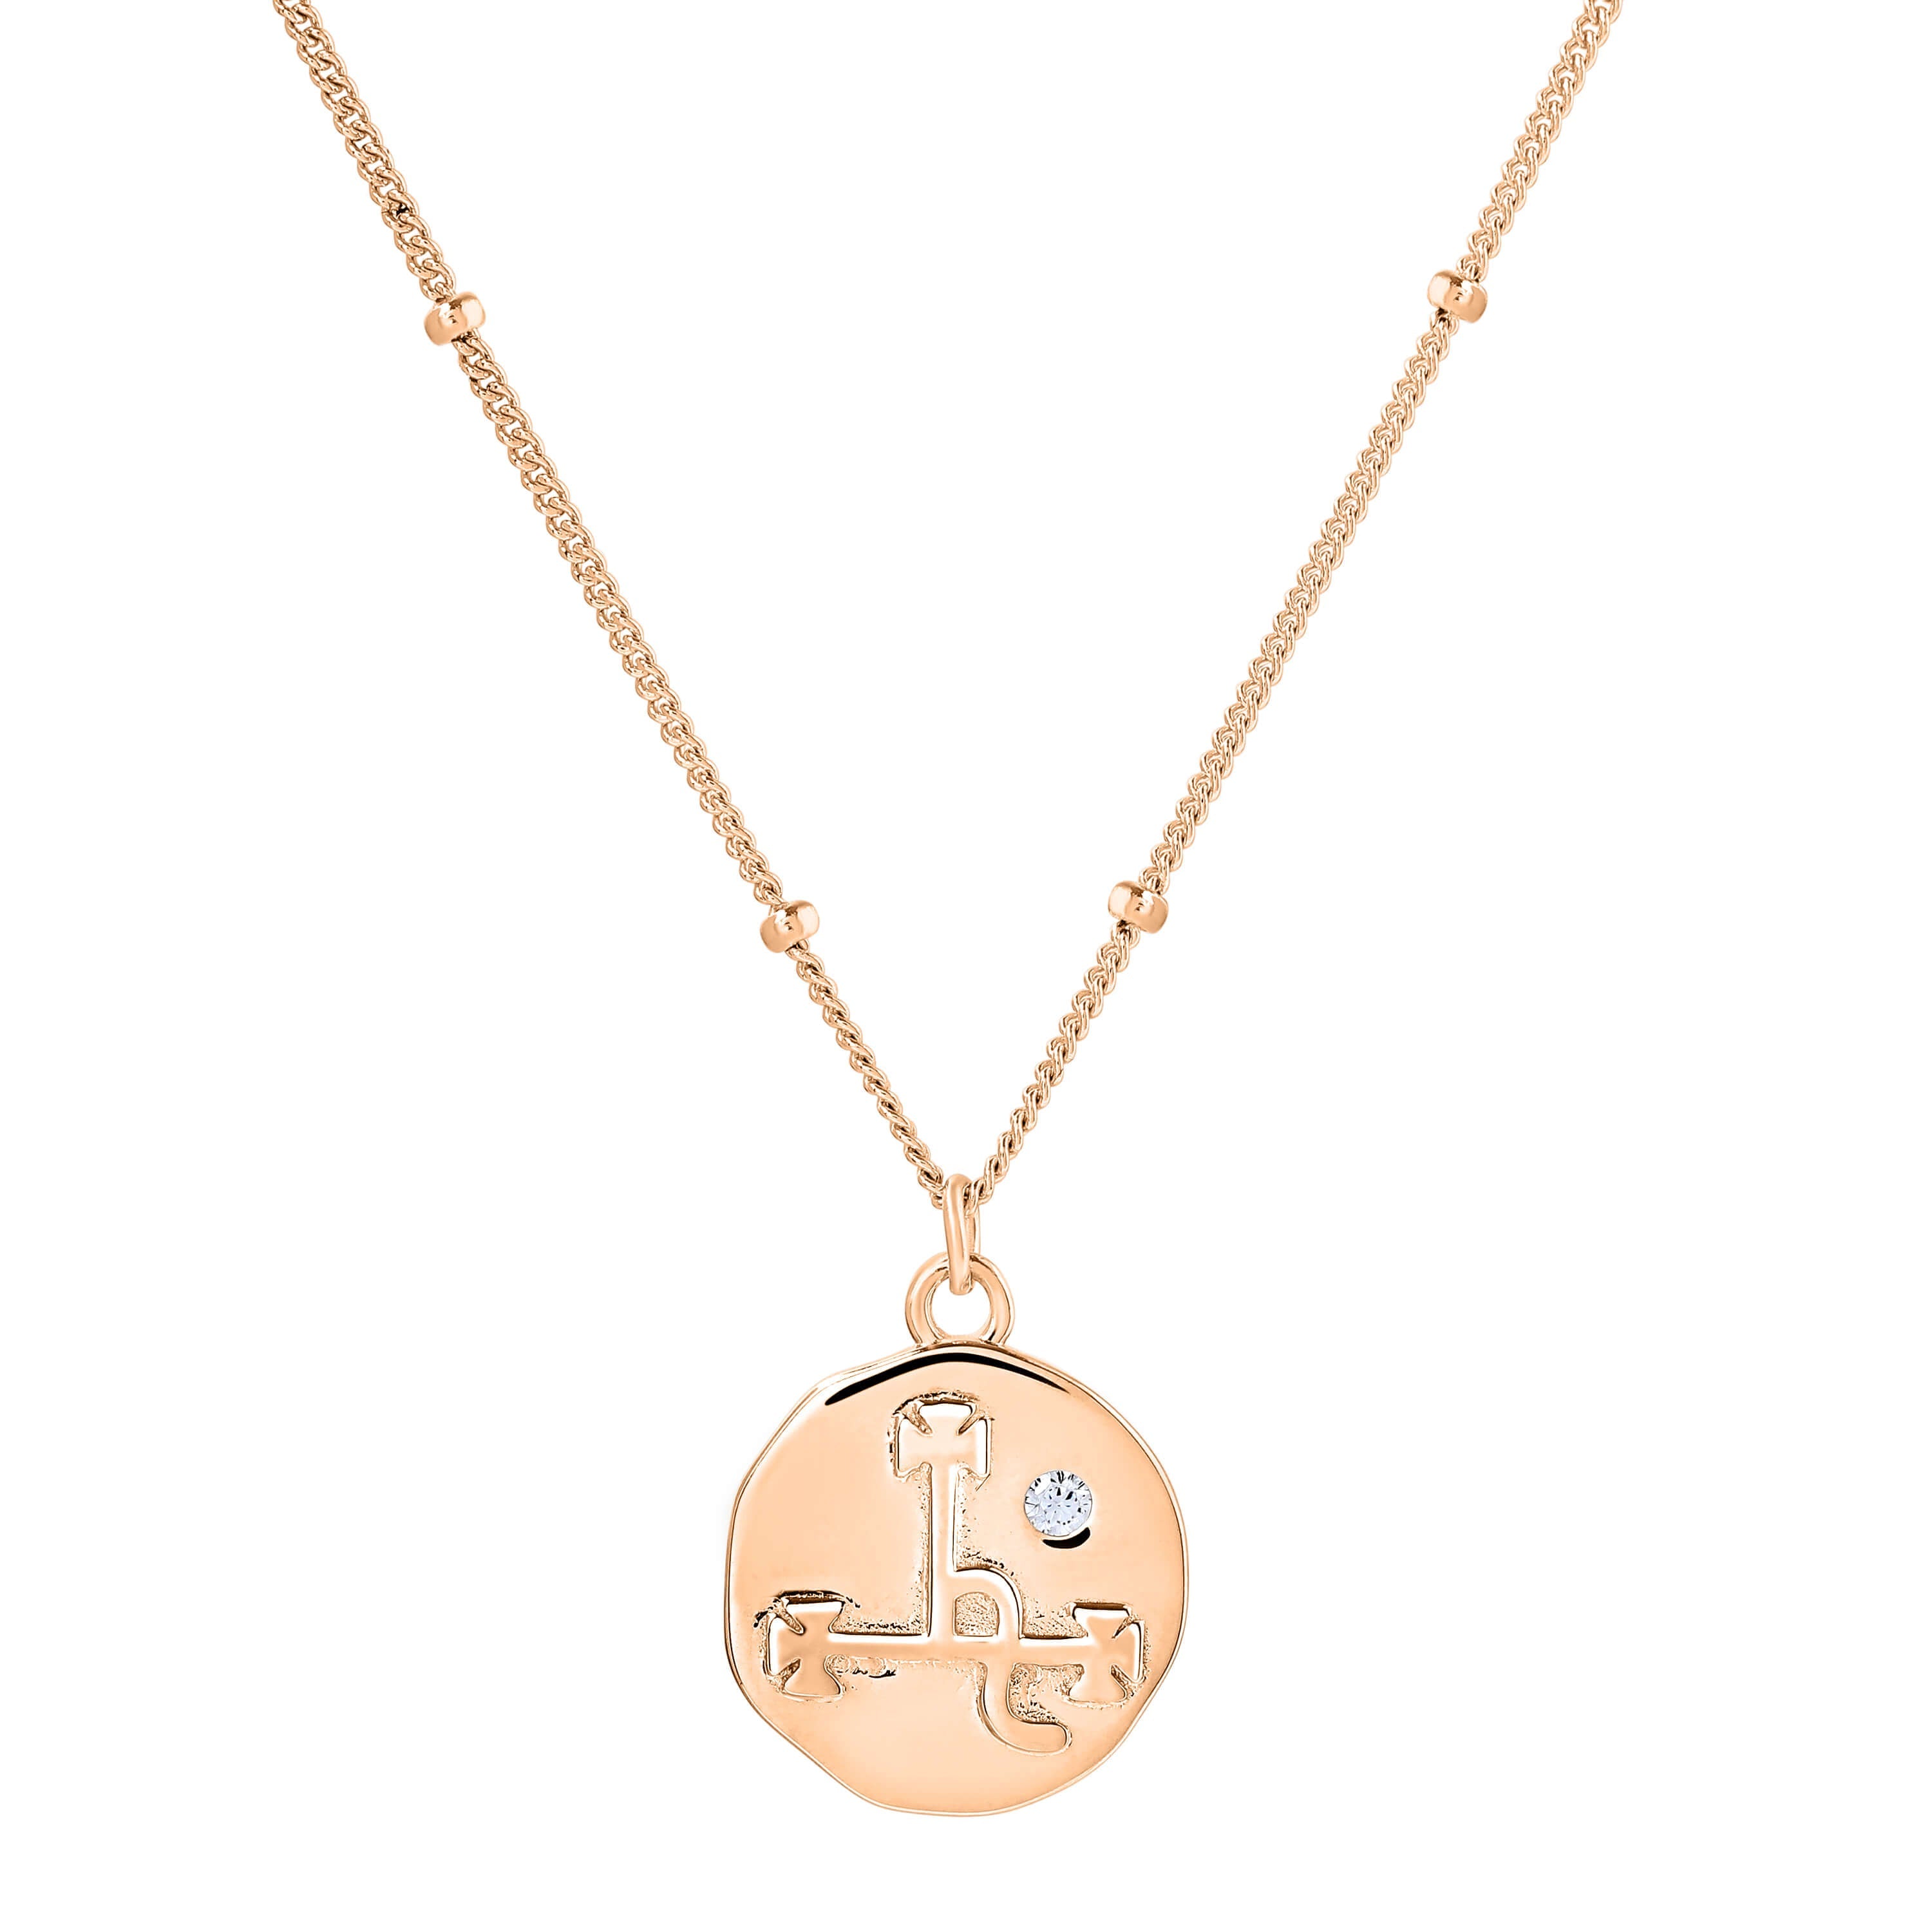 Lilith Sigil Necklace - Rose Gold